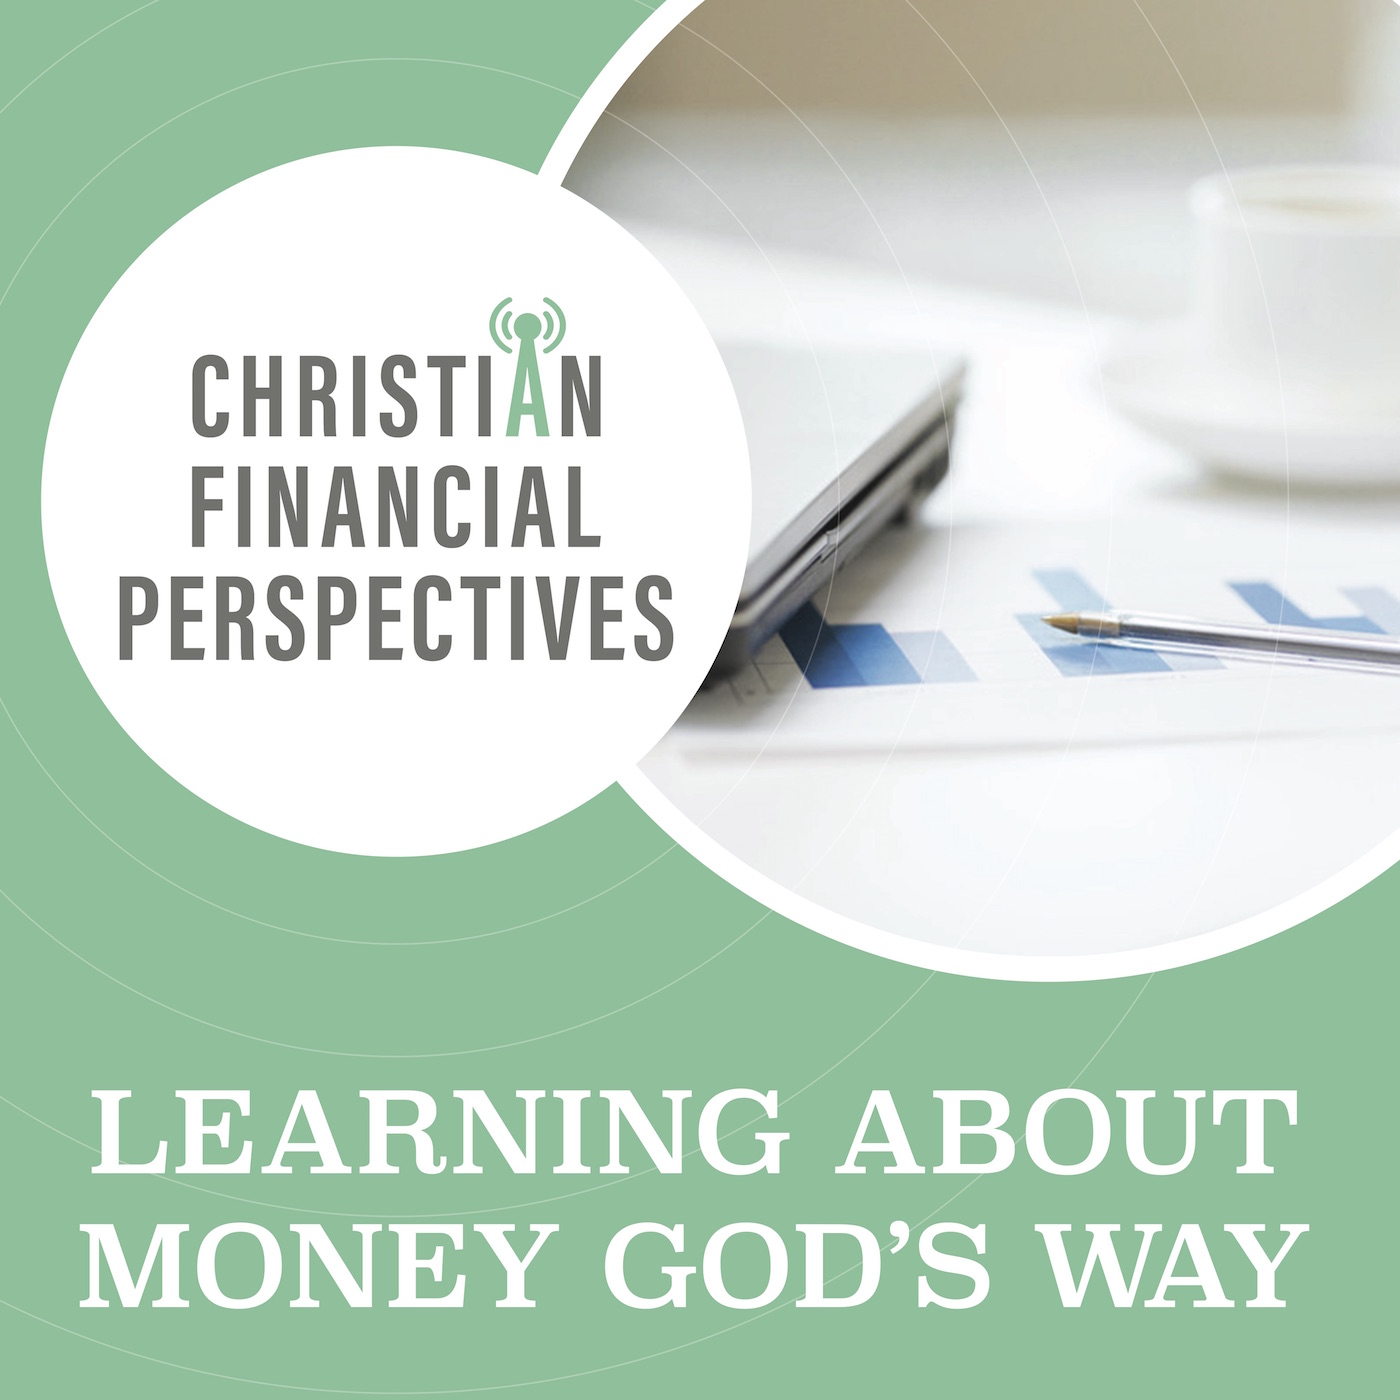 Christian Financial Perspectives